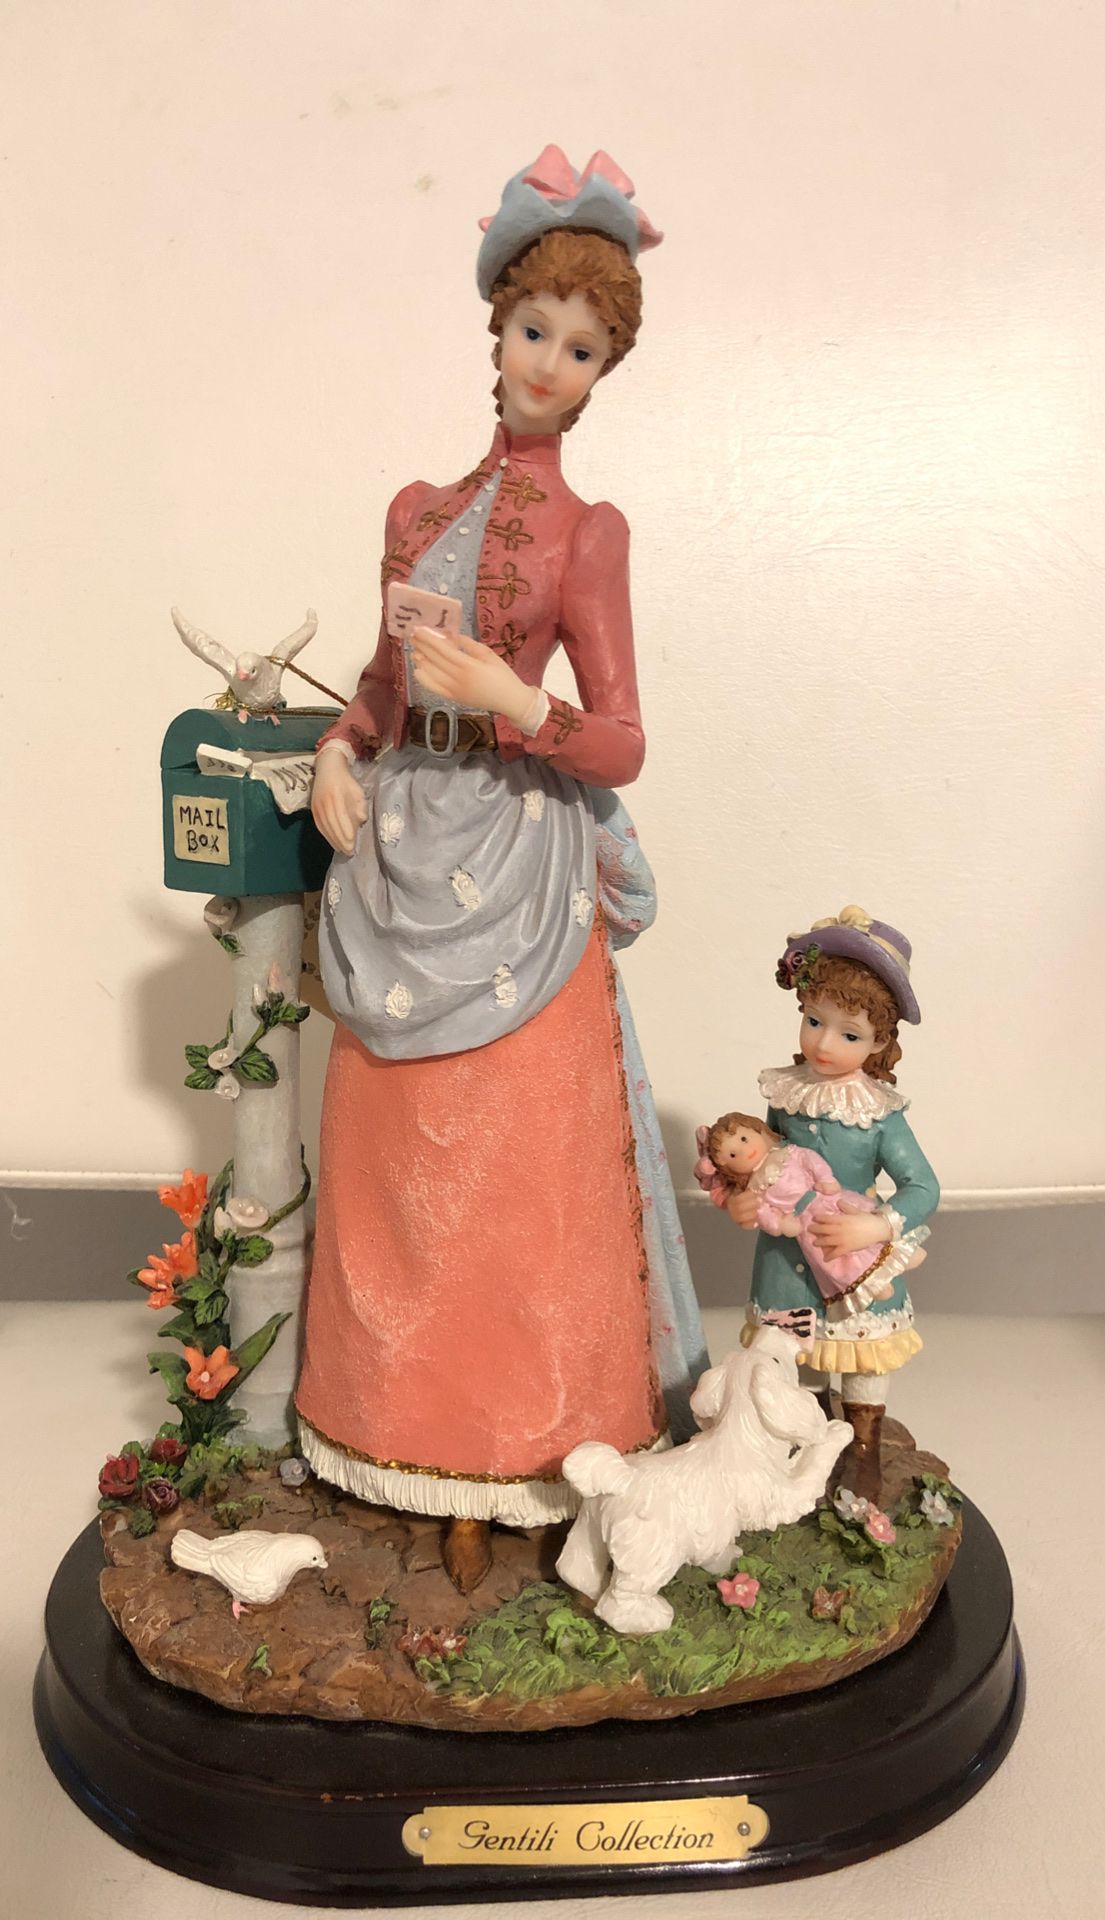 Gentility Collection Mother and Daughter collectible Figure Statue